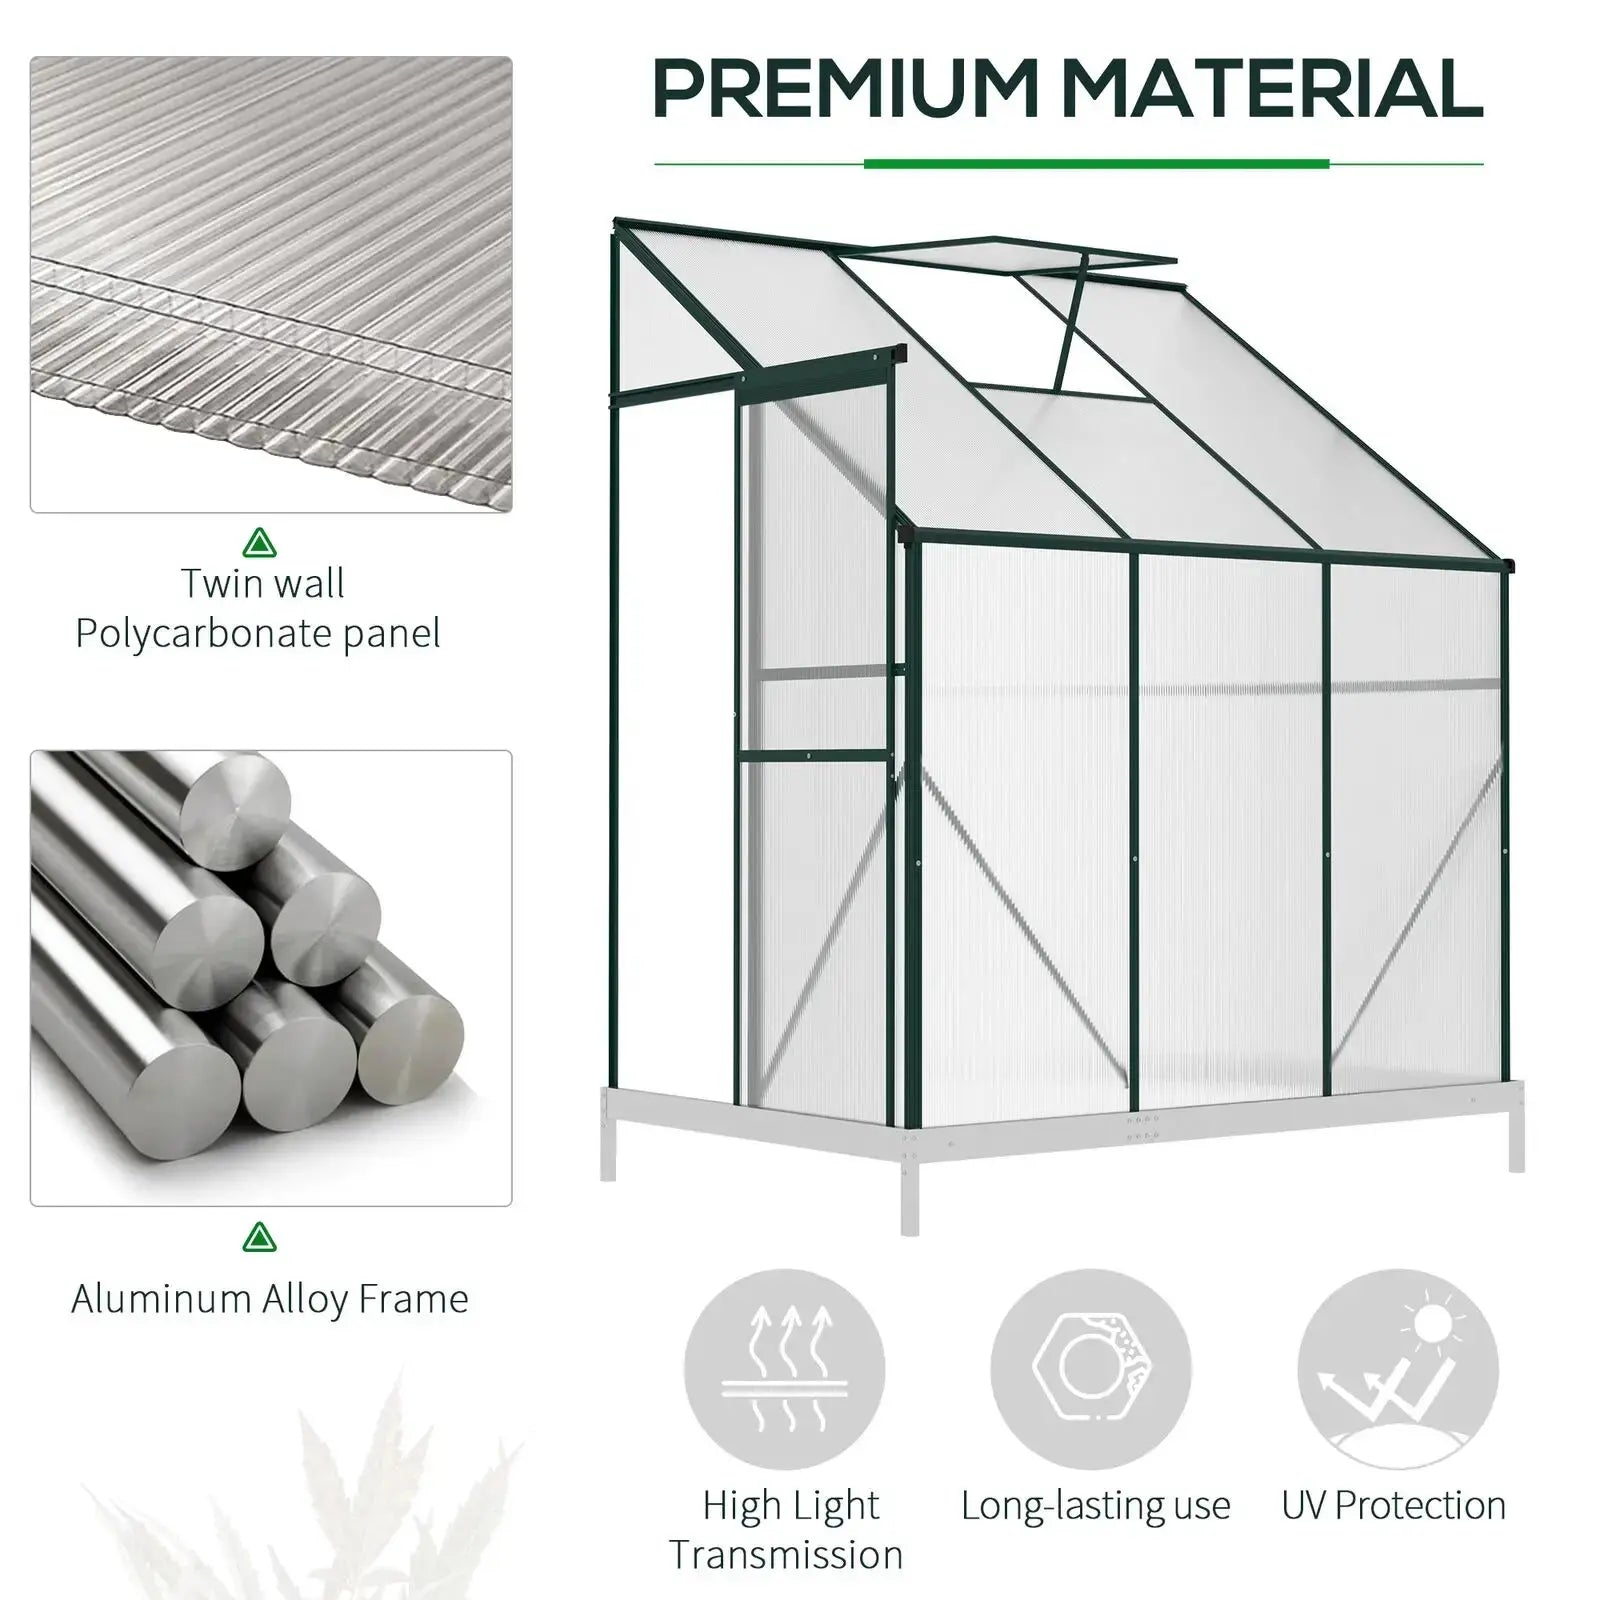 6' x 4' x 7'Aluminum Greenhouse, Polystyrene Walk-in Garden Greenhouse with 2 Adjustable Roof Vents and 3 Doors, Clear - The Greenhouse Pros